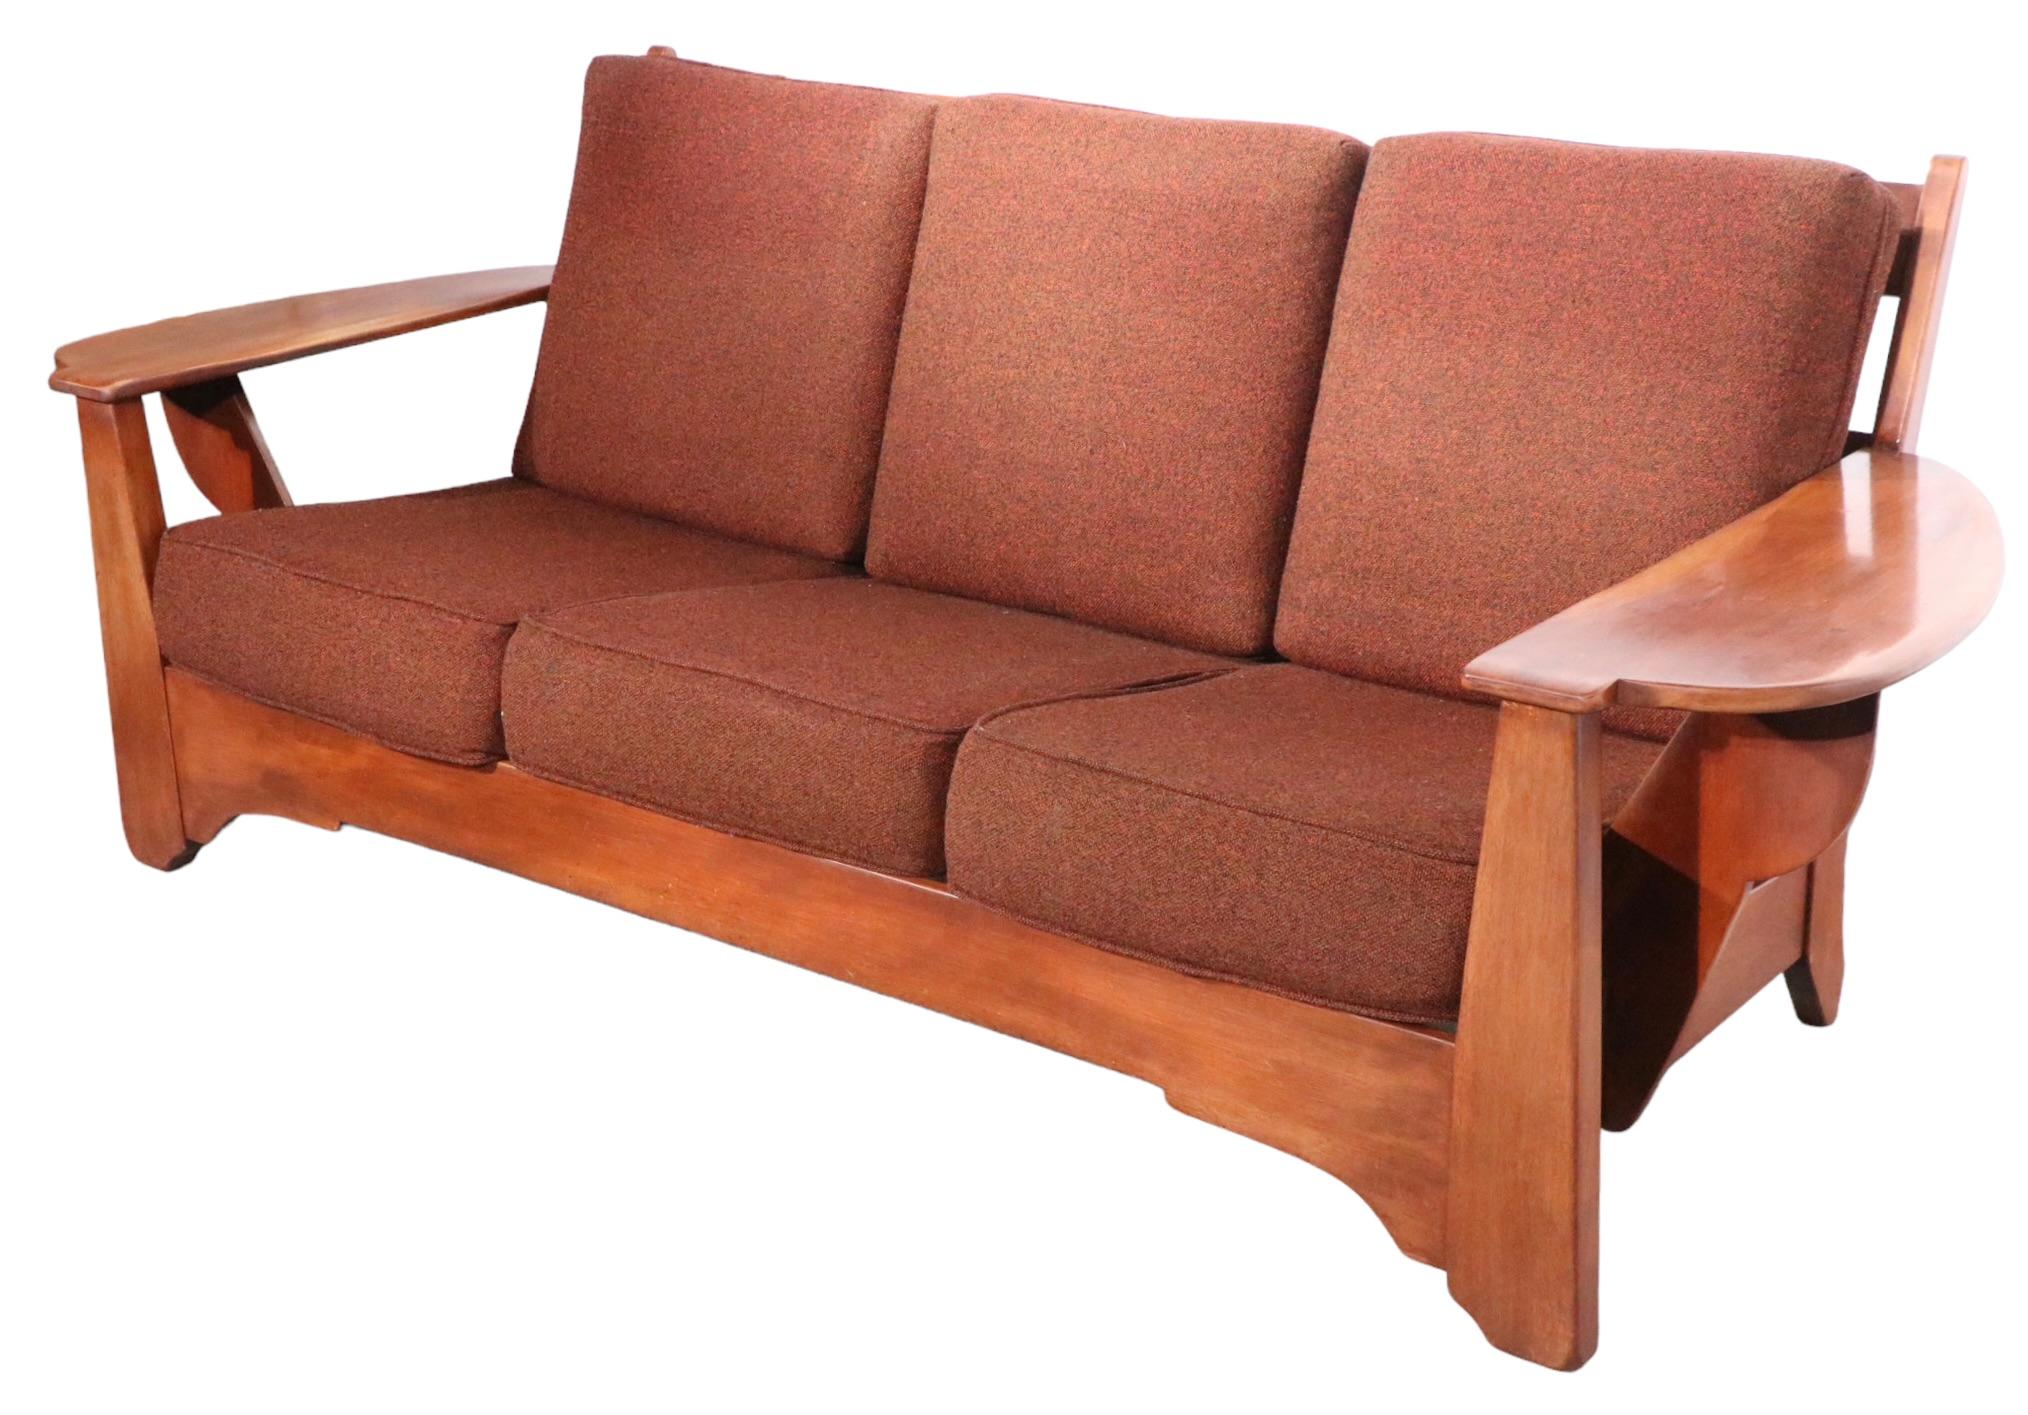 20th Century Paddle Arm Cushman Colonial Creations Sofa designed by Herman de Vries 1940s/50s